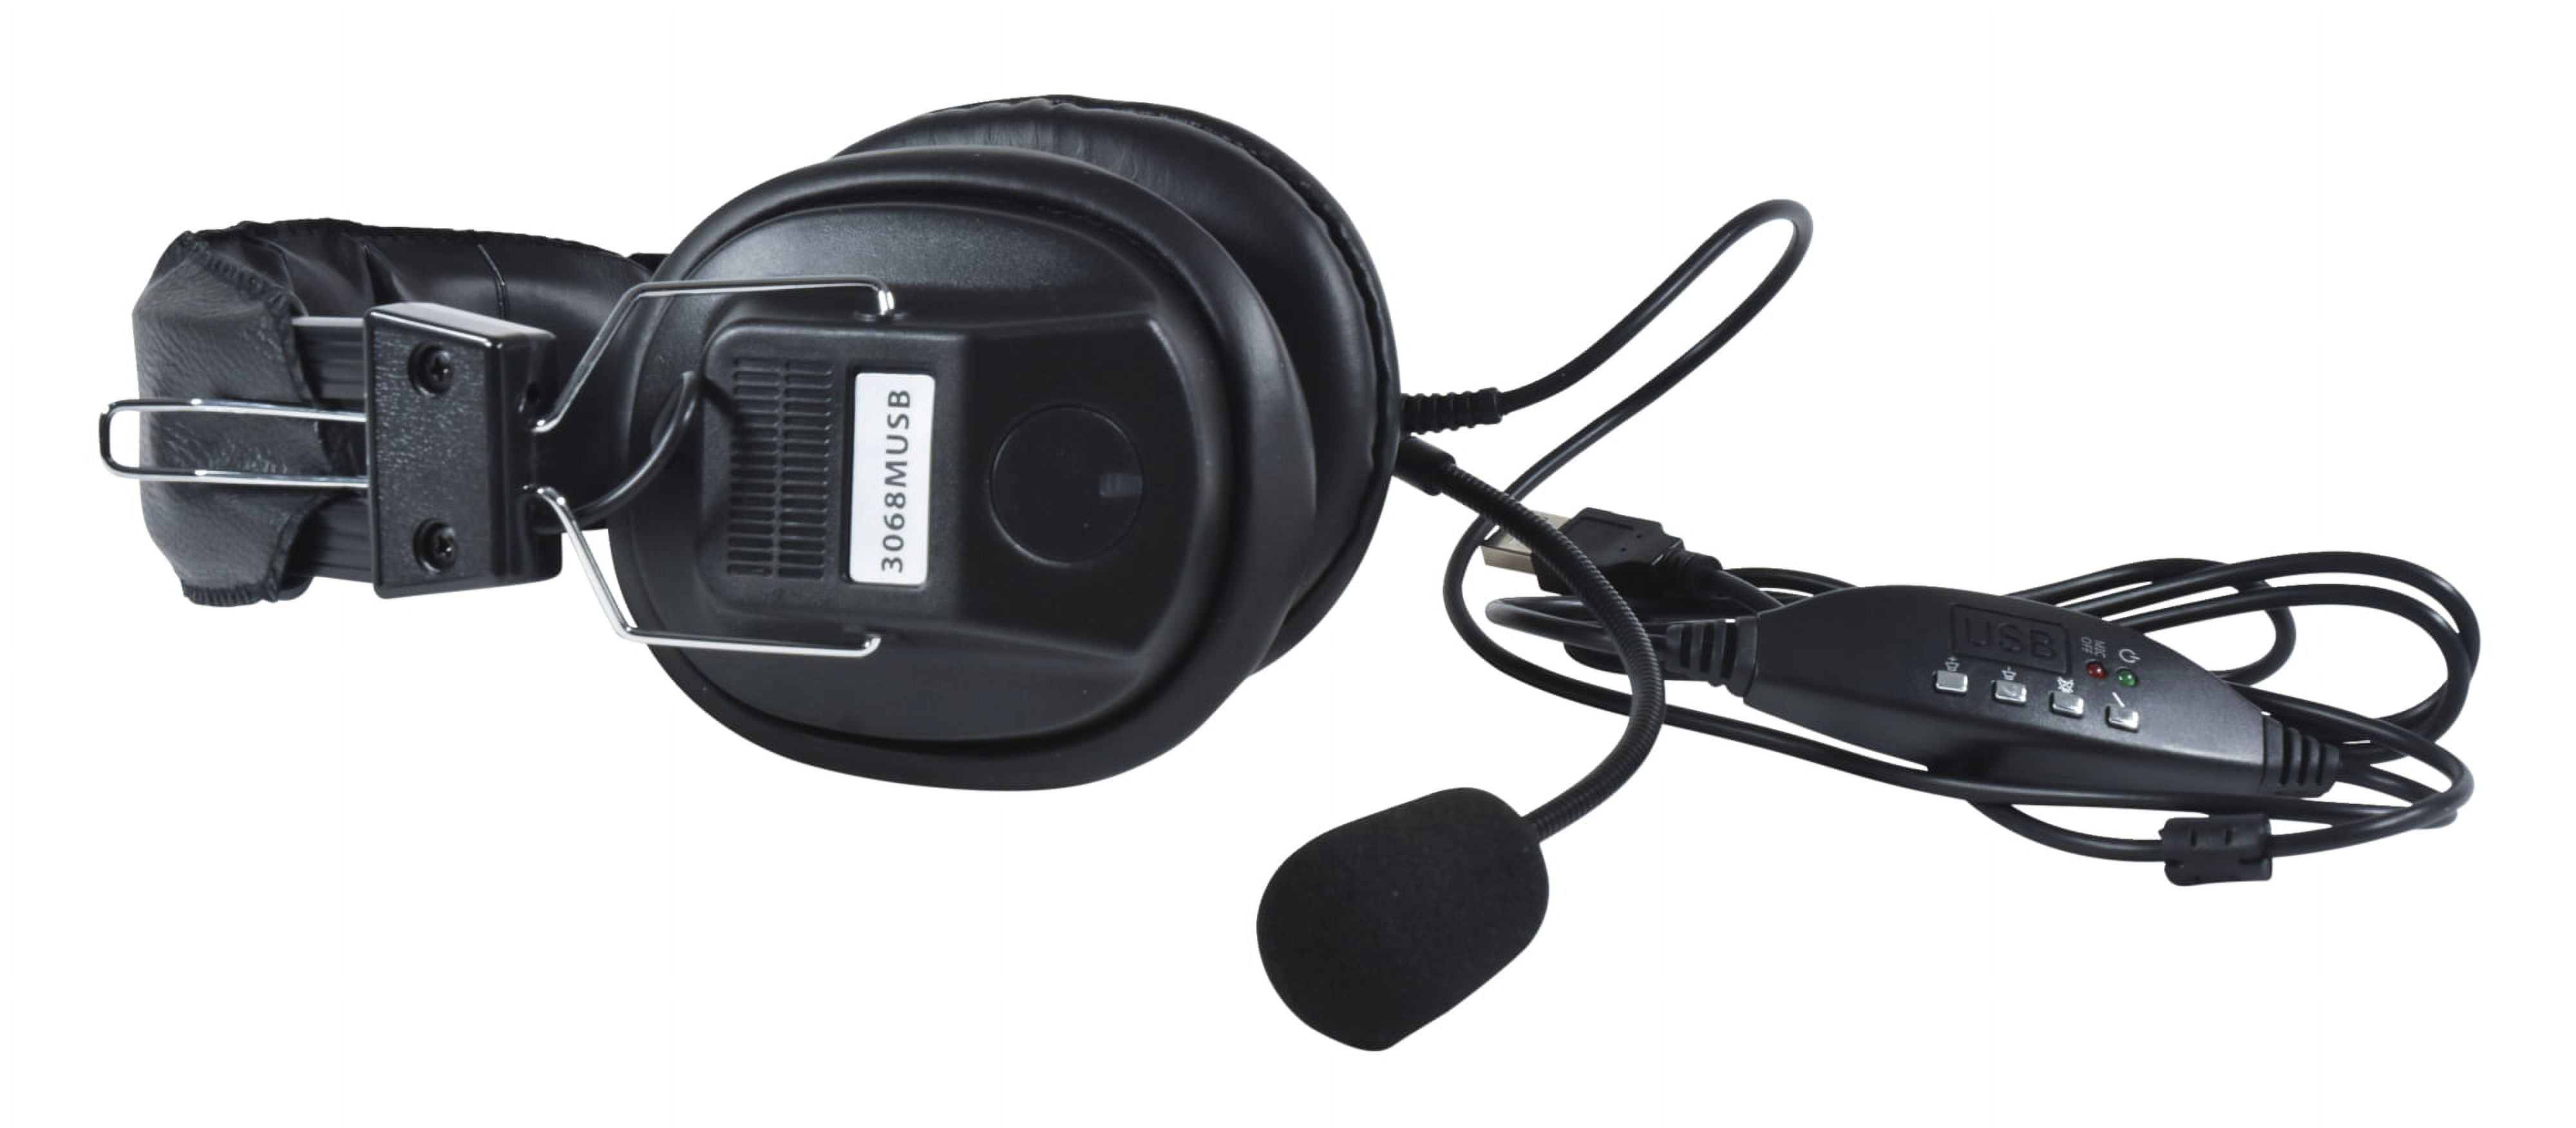 Califone 3068MUSB Over-Ear Stereo Headset with Gooseneck